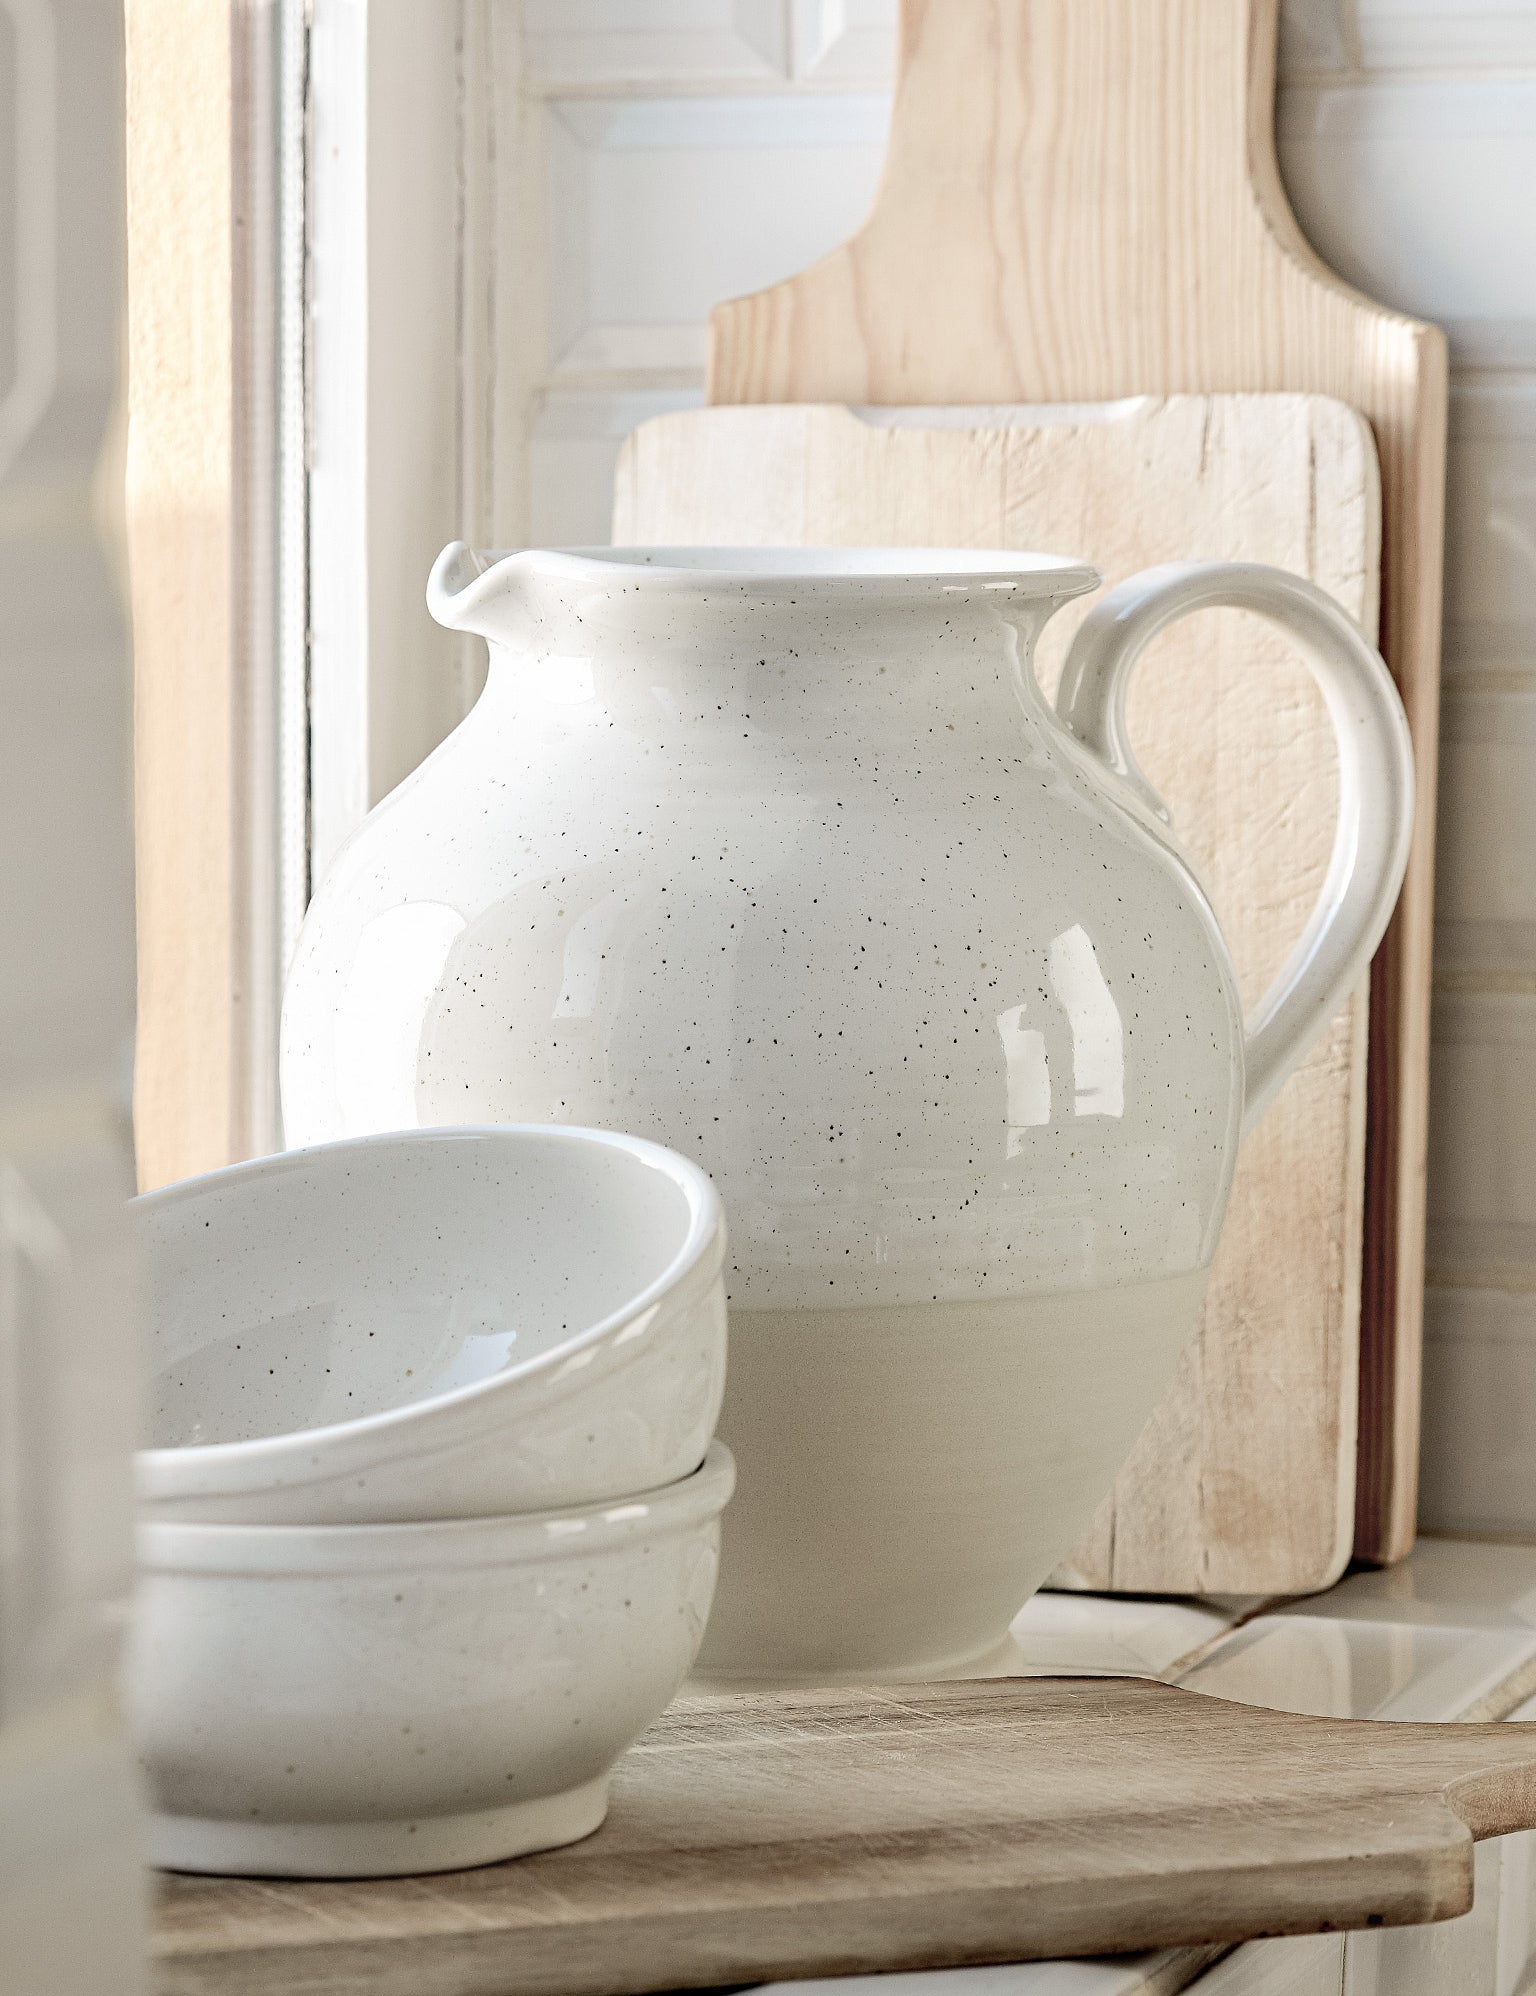 Off white large jug with handle